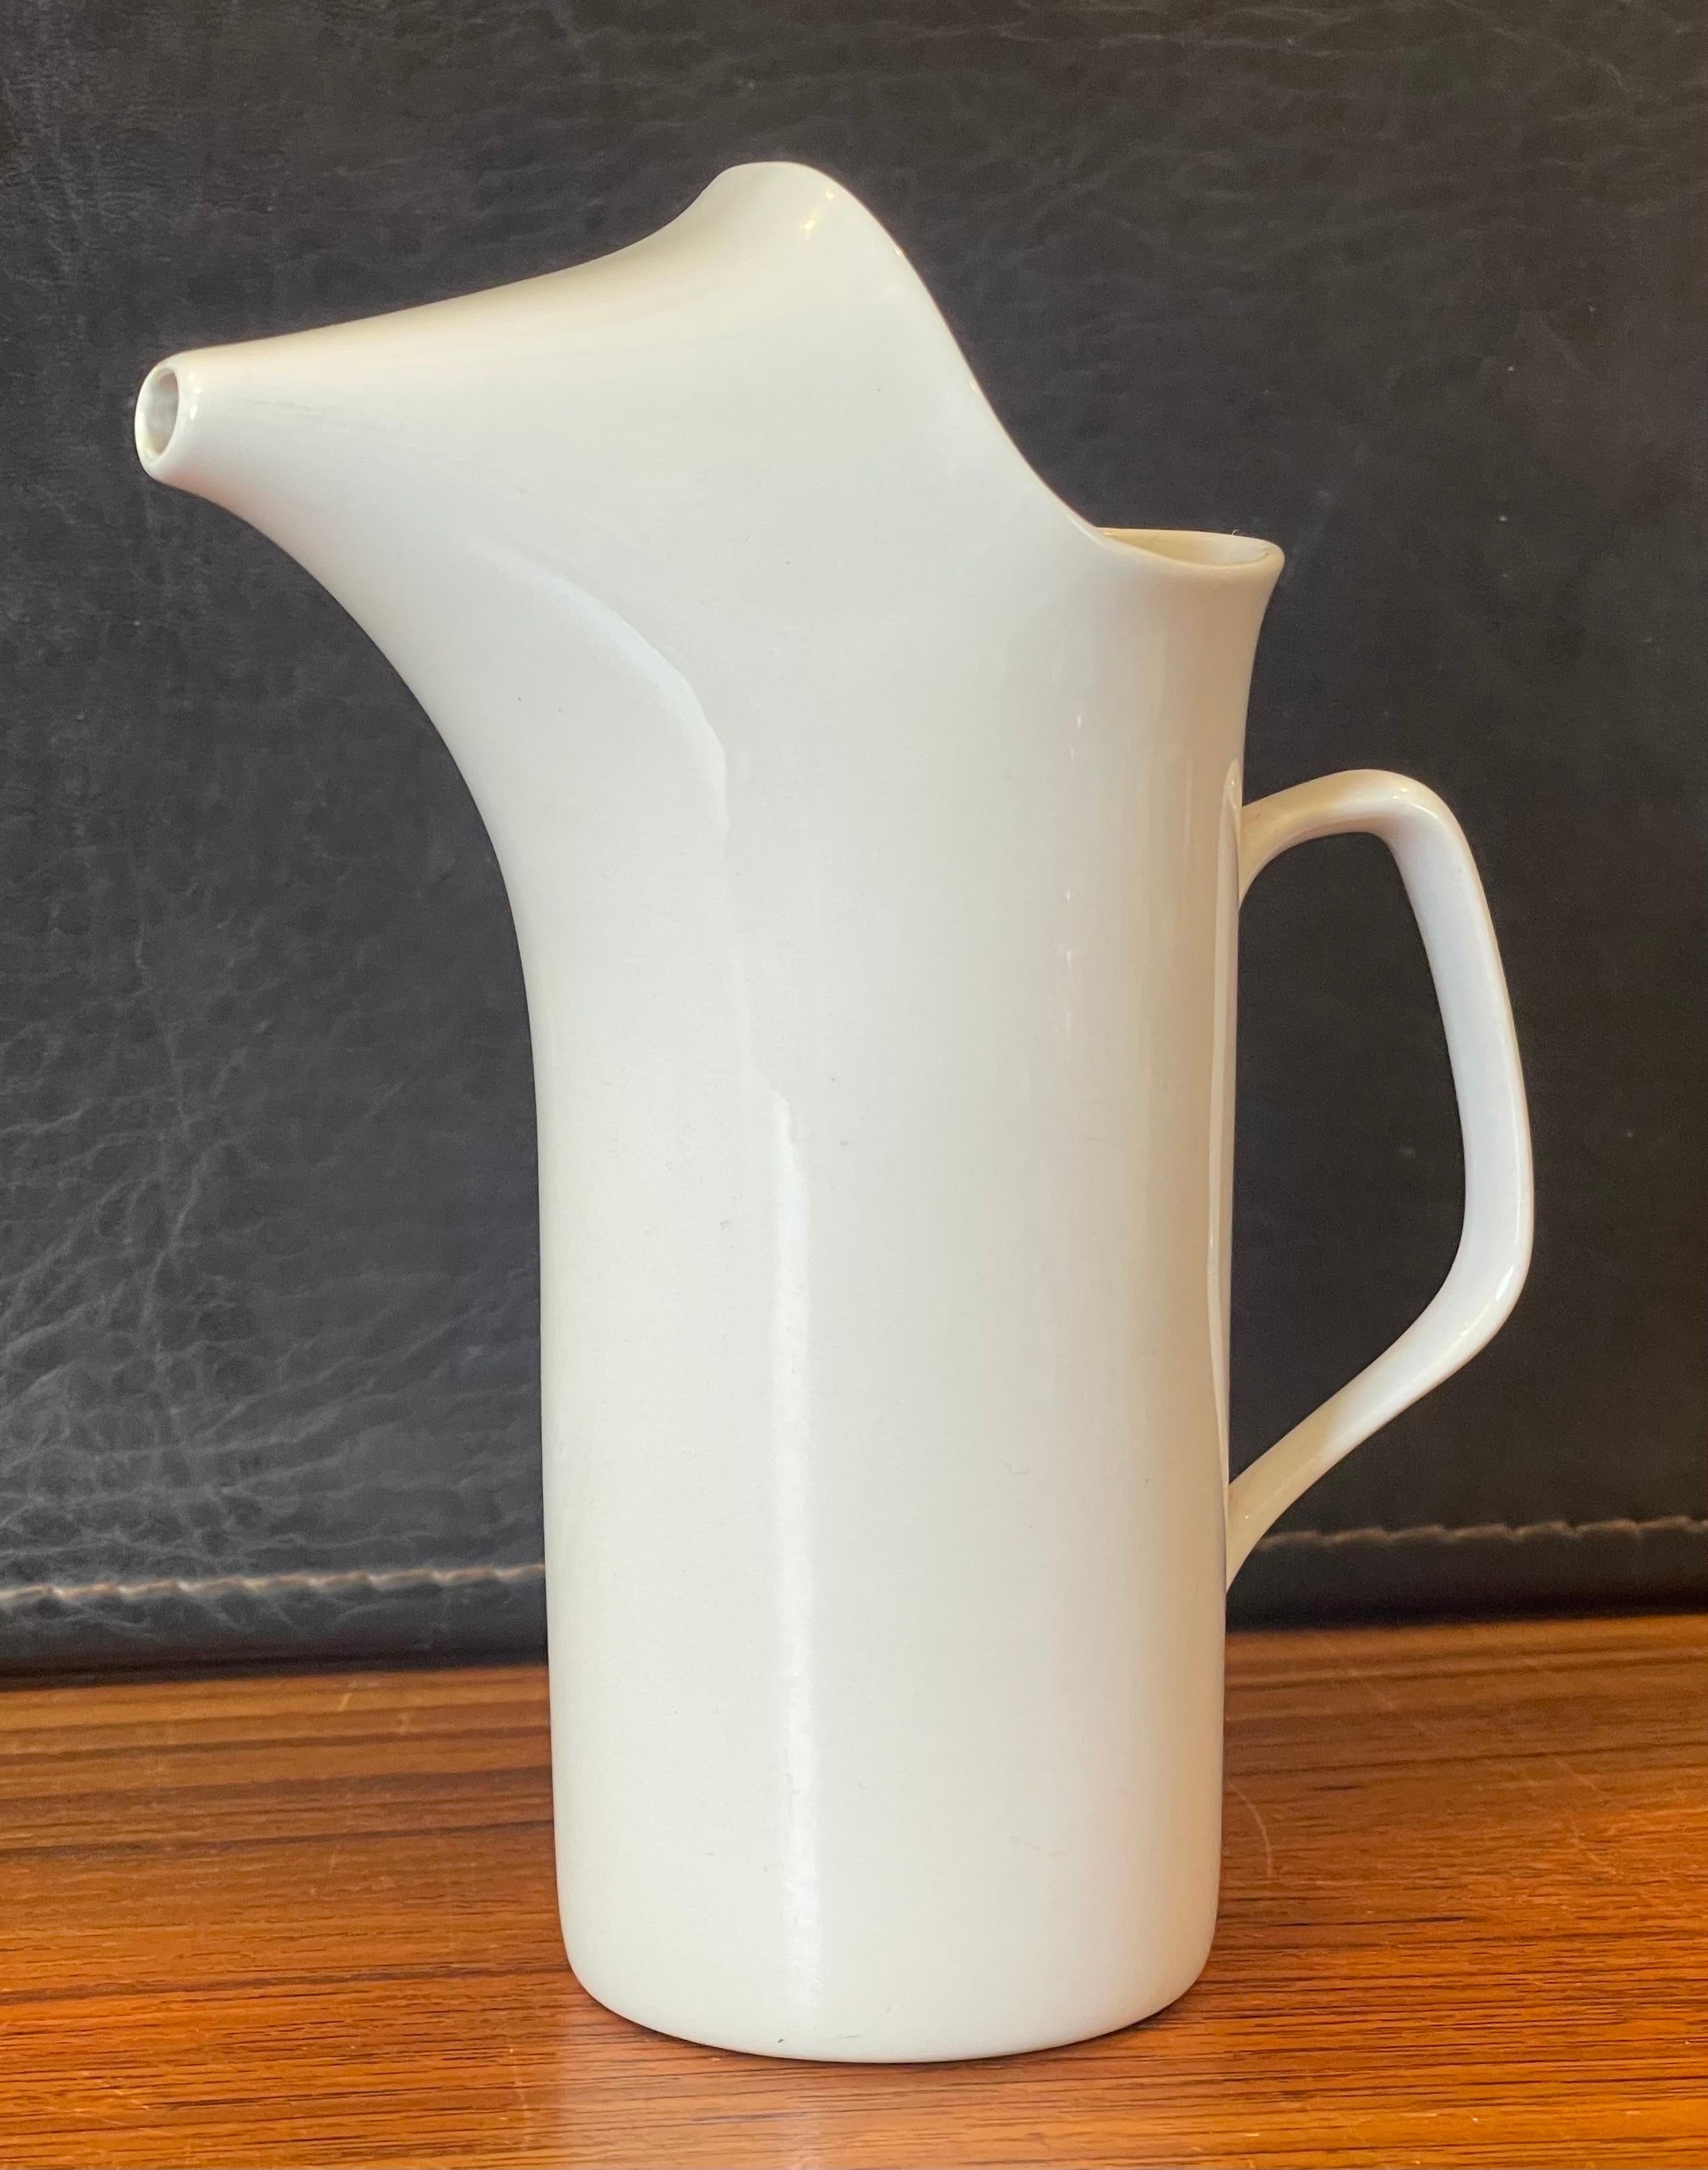 Beautiful MCM small ironstone porcelain pitcher (creamer) by Lagardo Tackett for Schmid, circa 1950s. The piece is in very good vintage condition with no chips or cracks and measures 5